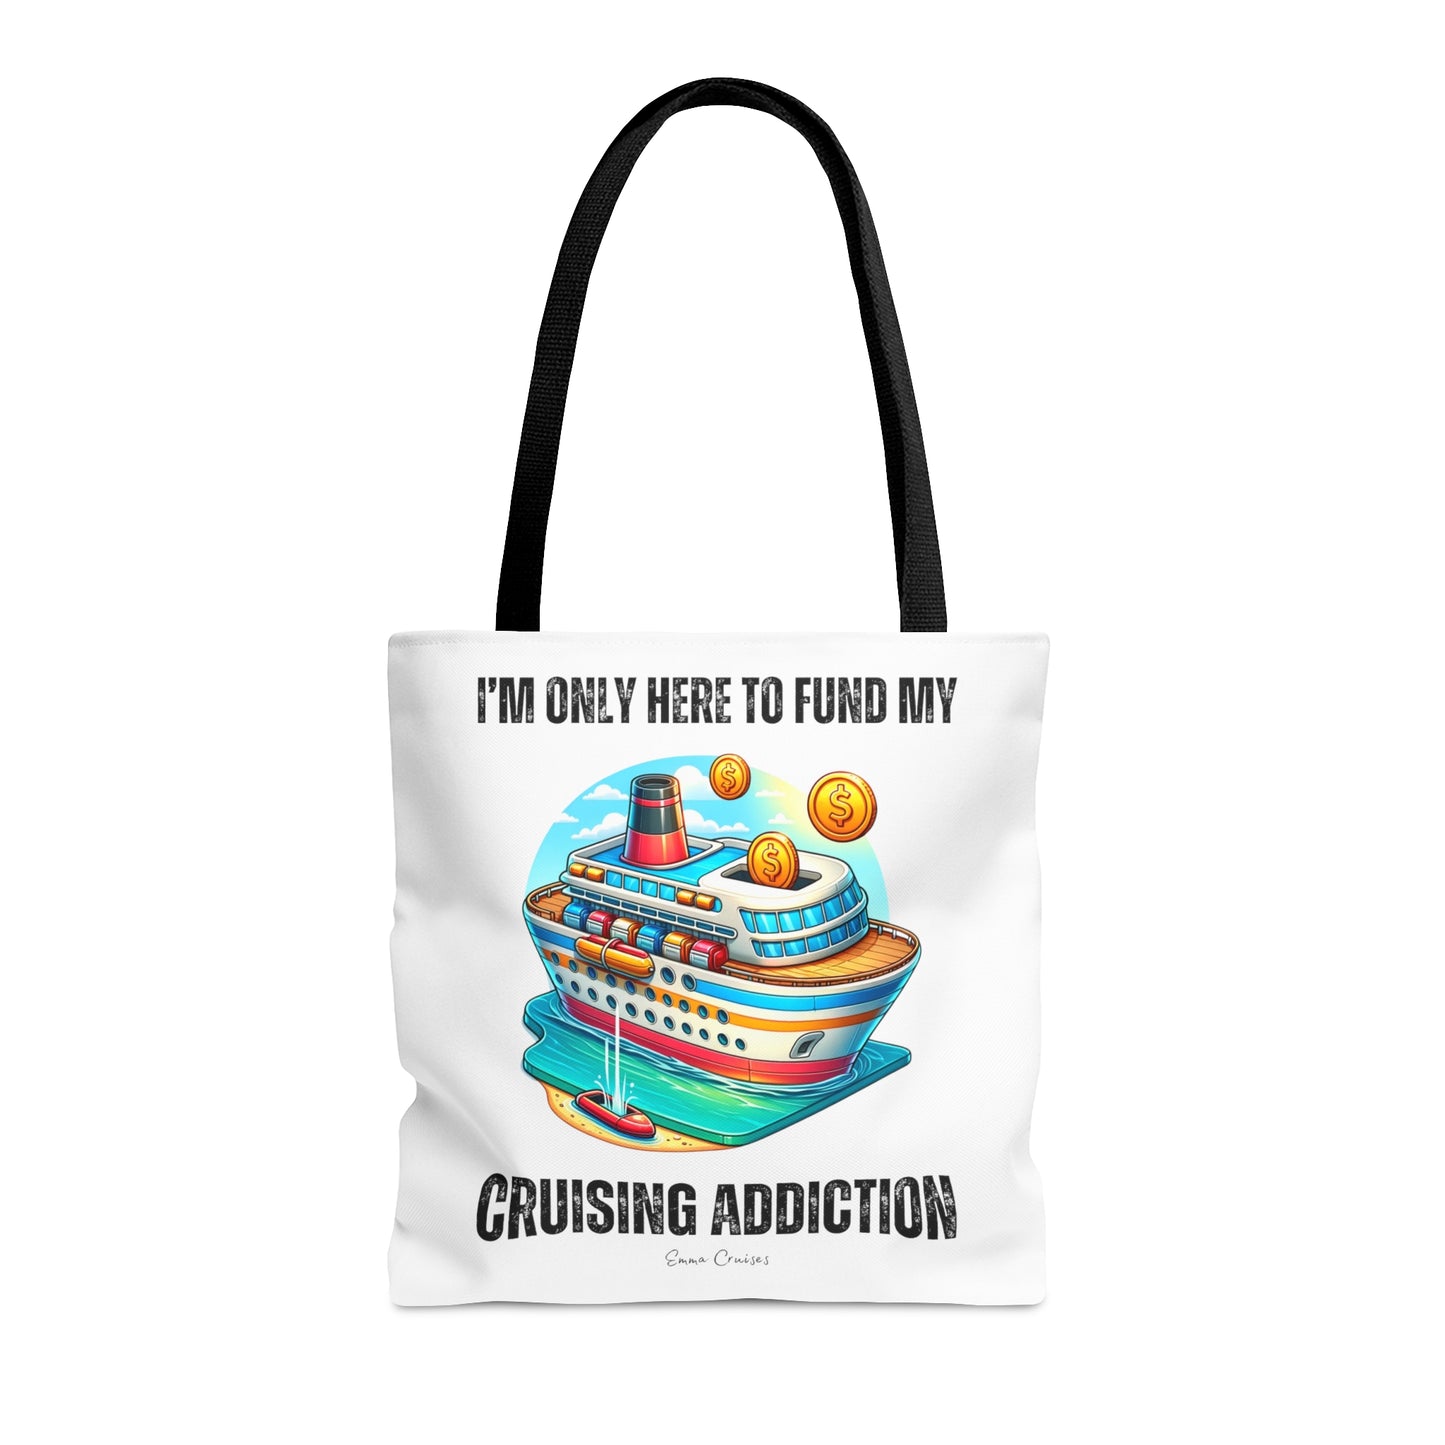 I'm Only Here to Fund My Cruising Addiction - Bag